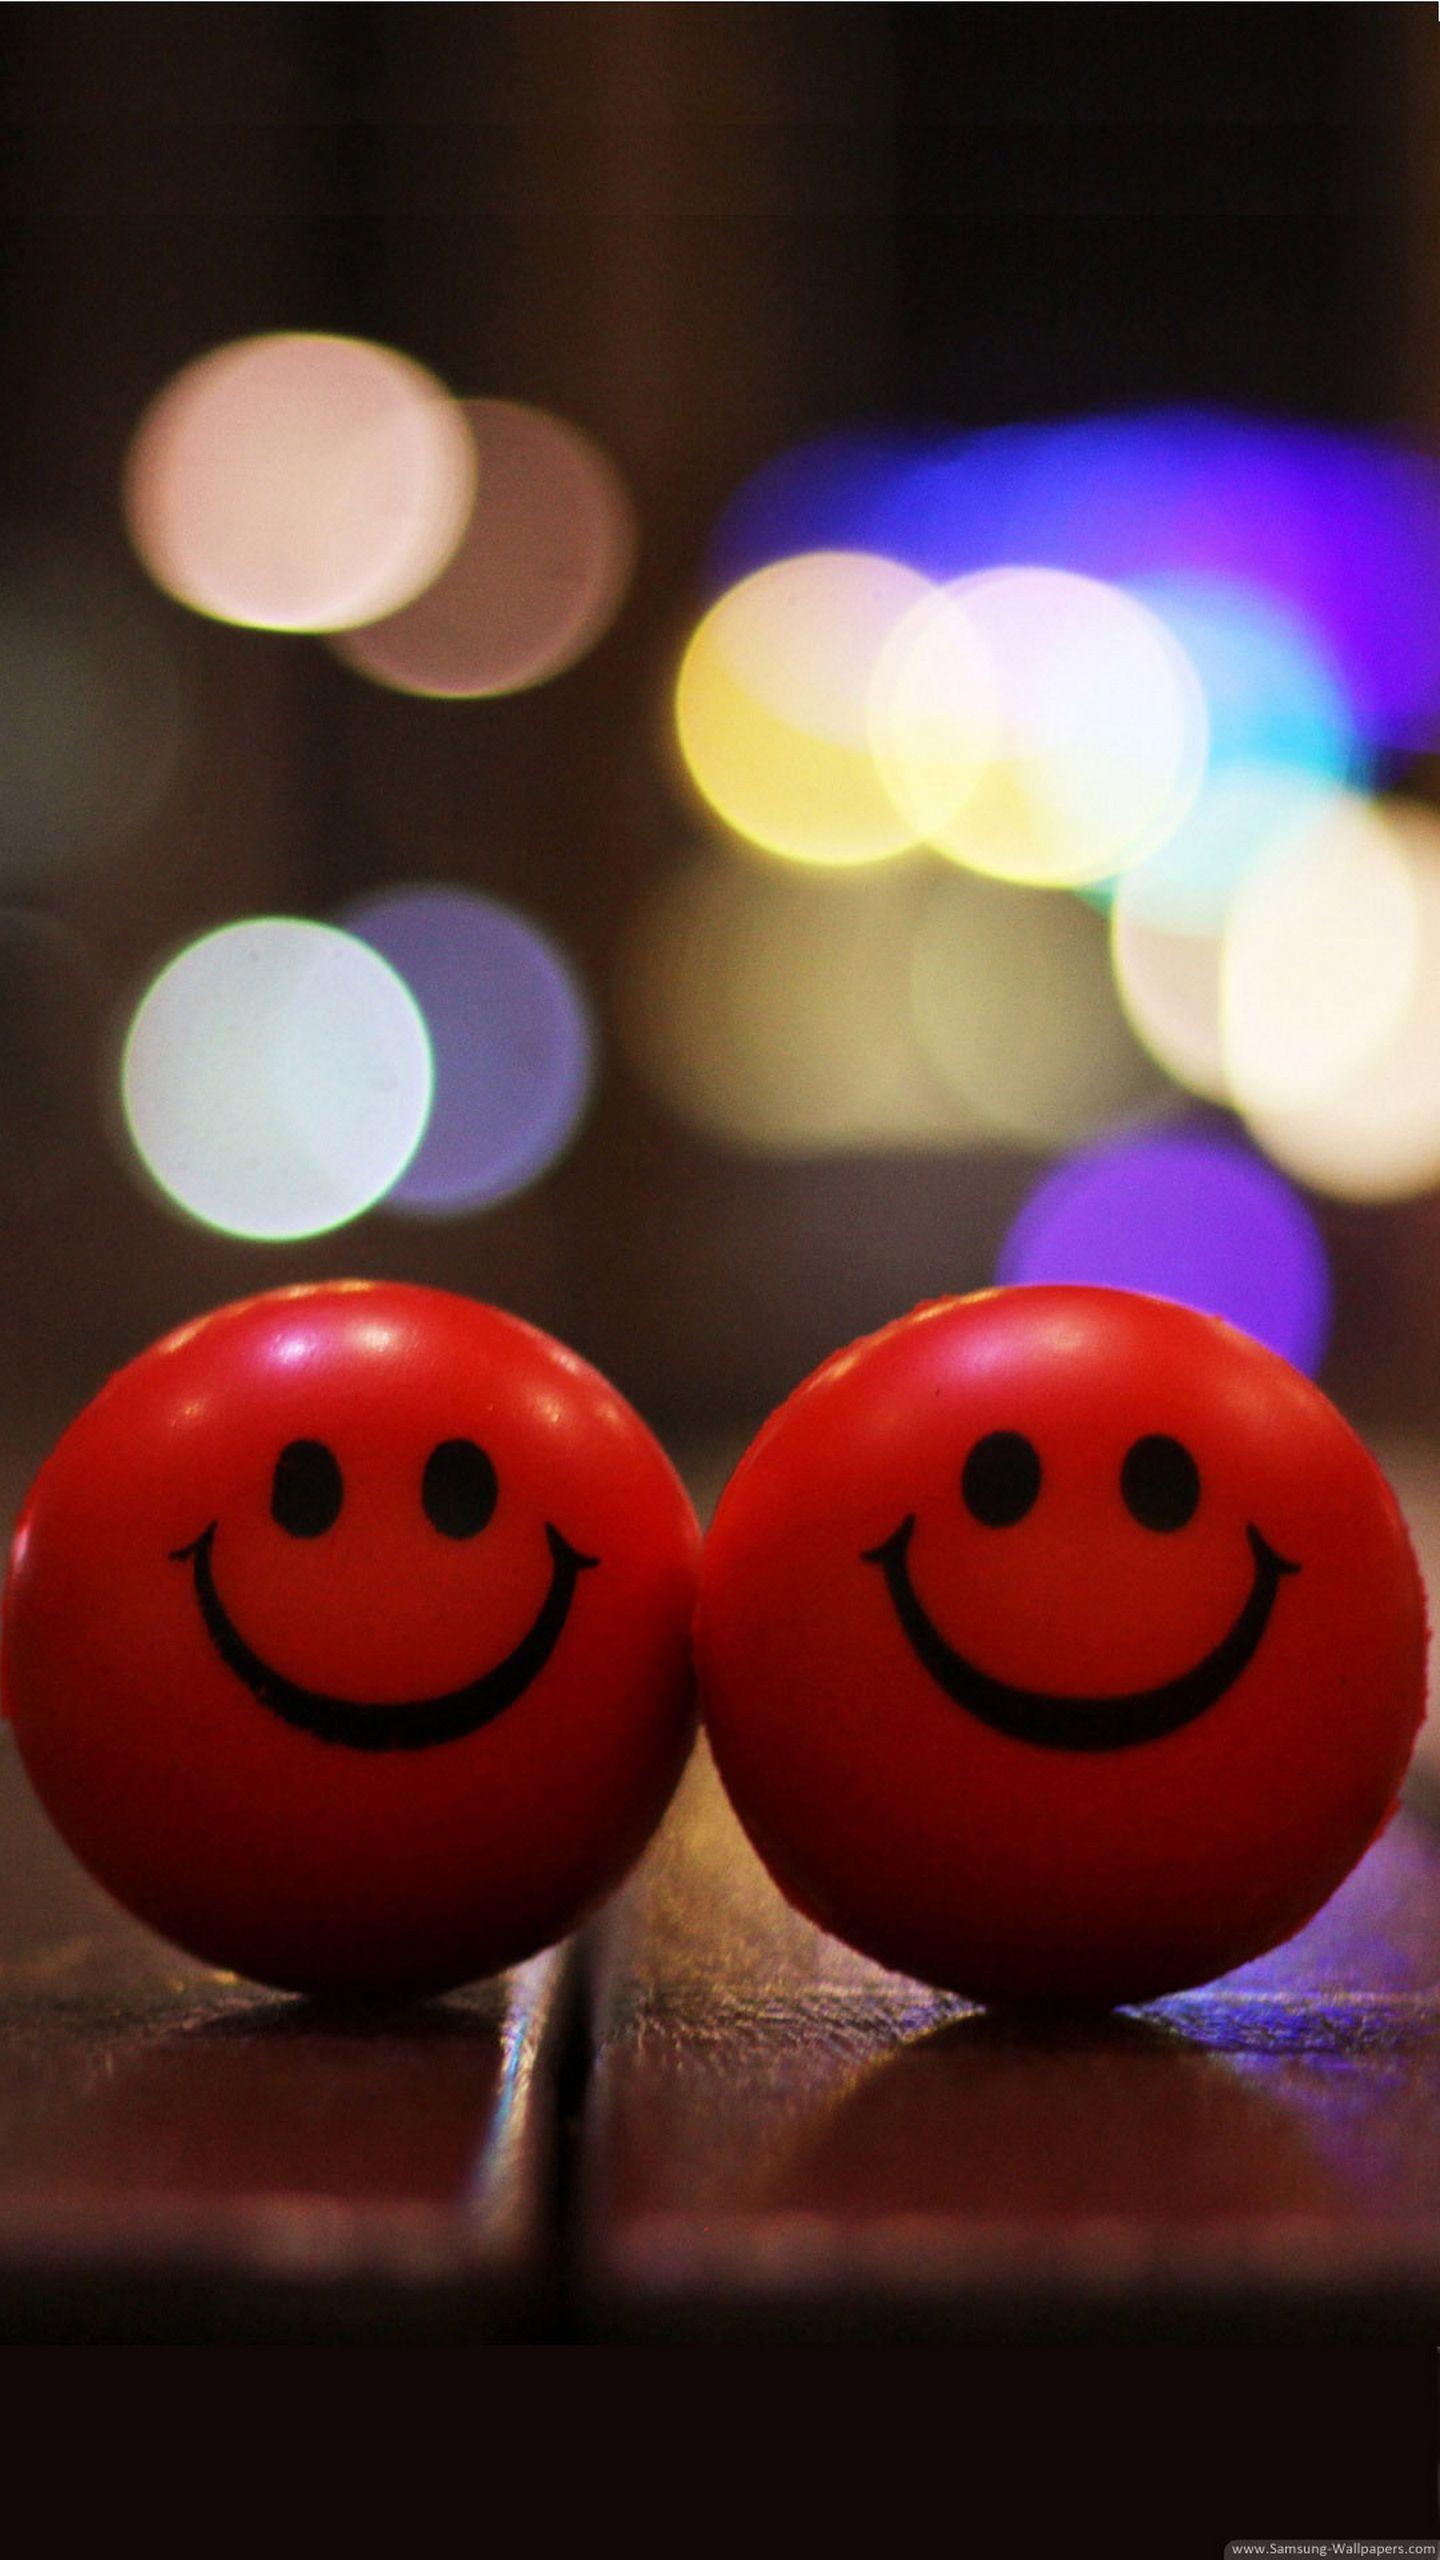 Two little red smiley balls!. Cool & Funny